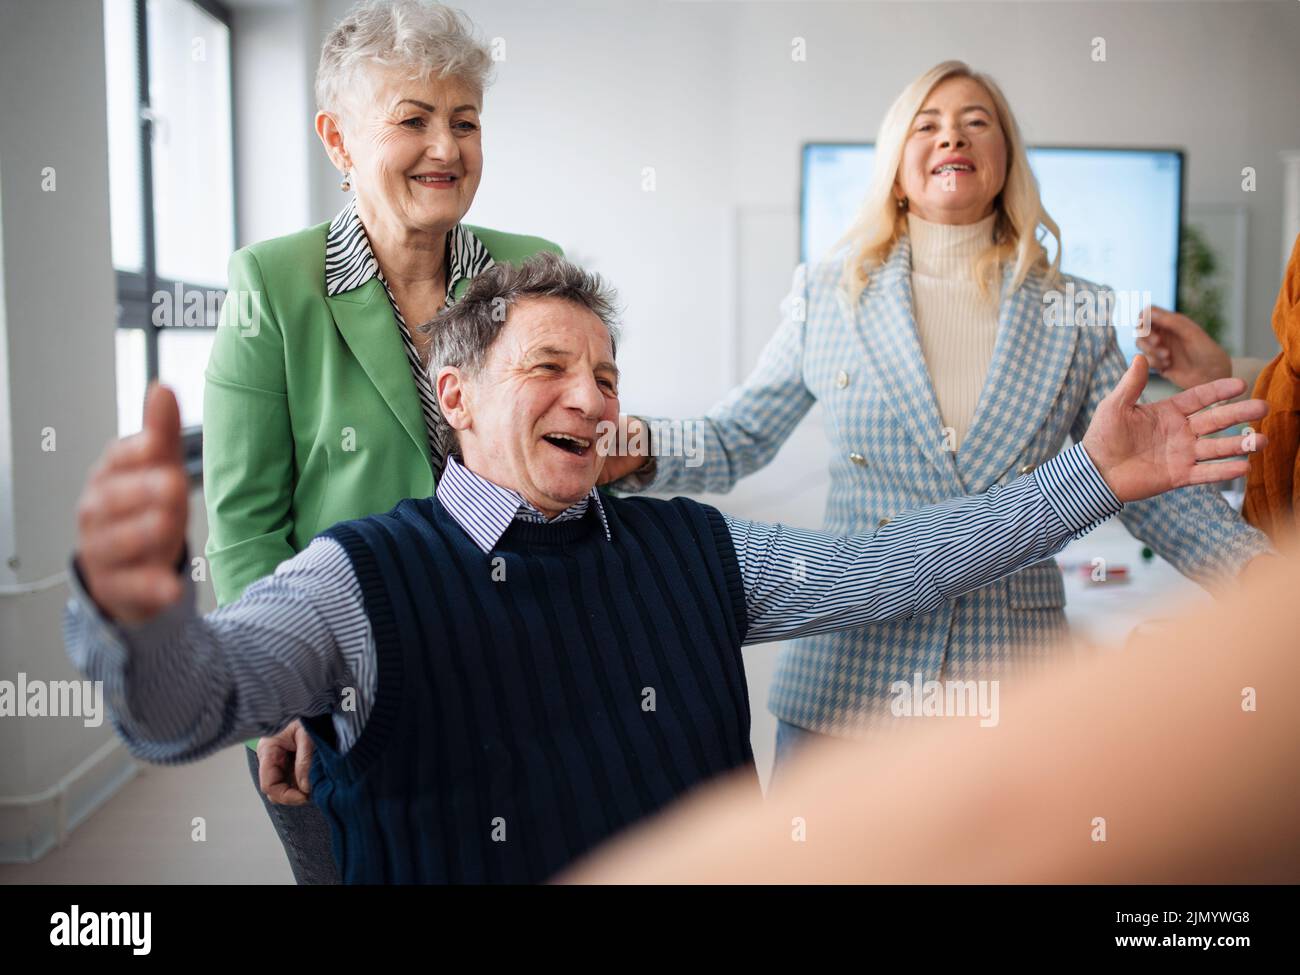 Happy senior students meeting and hugging in classroom. Stock Photo